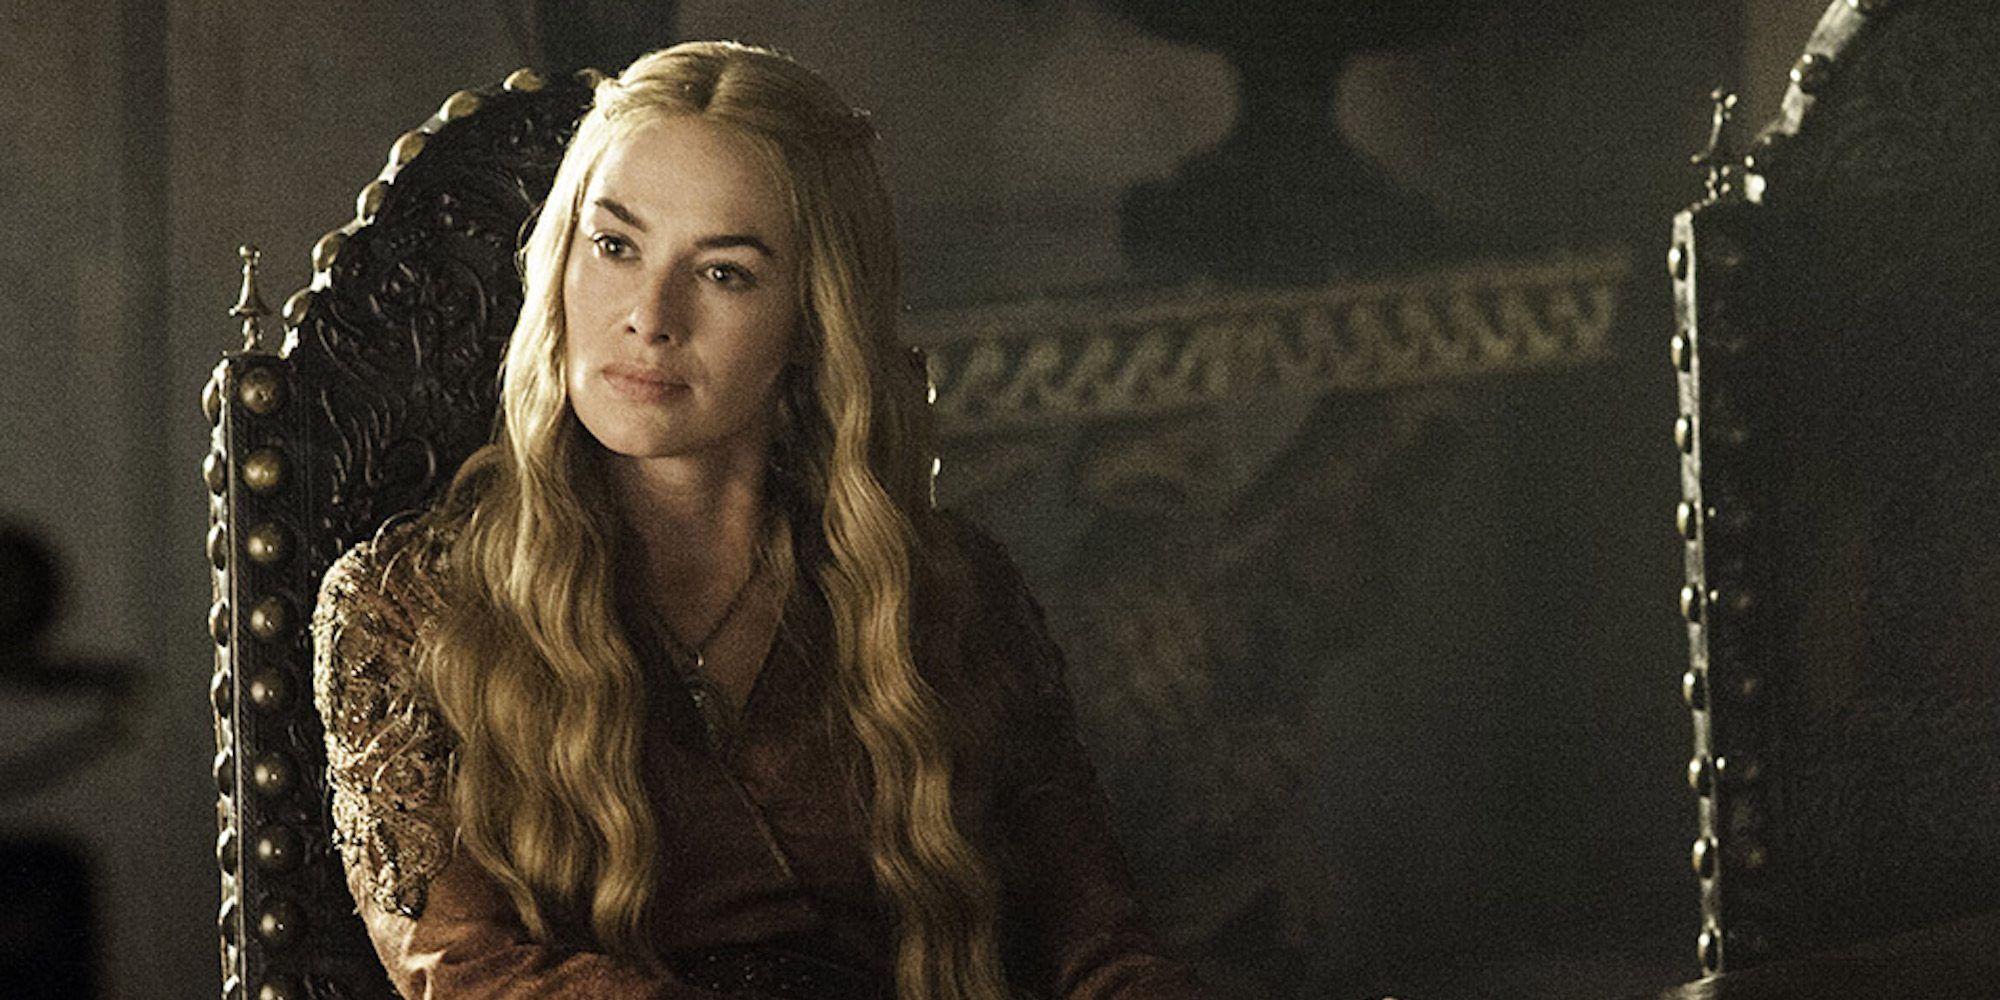 Cersei looking confused at someone off-camera in Game of Thrones.